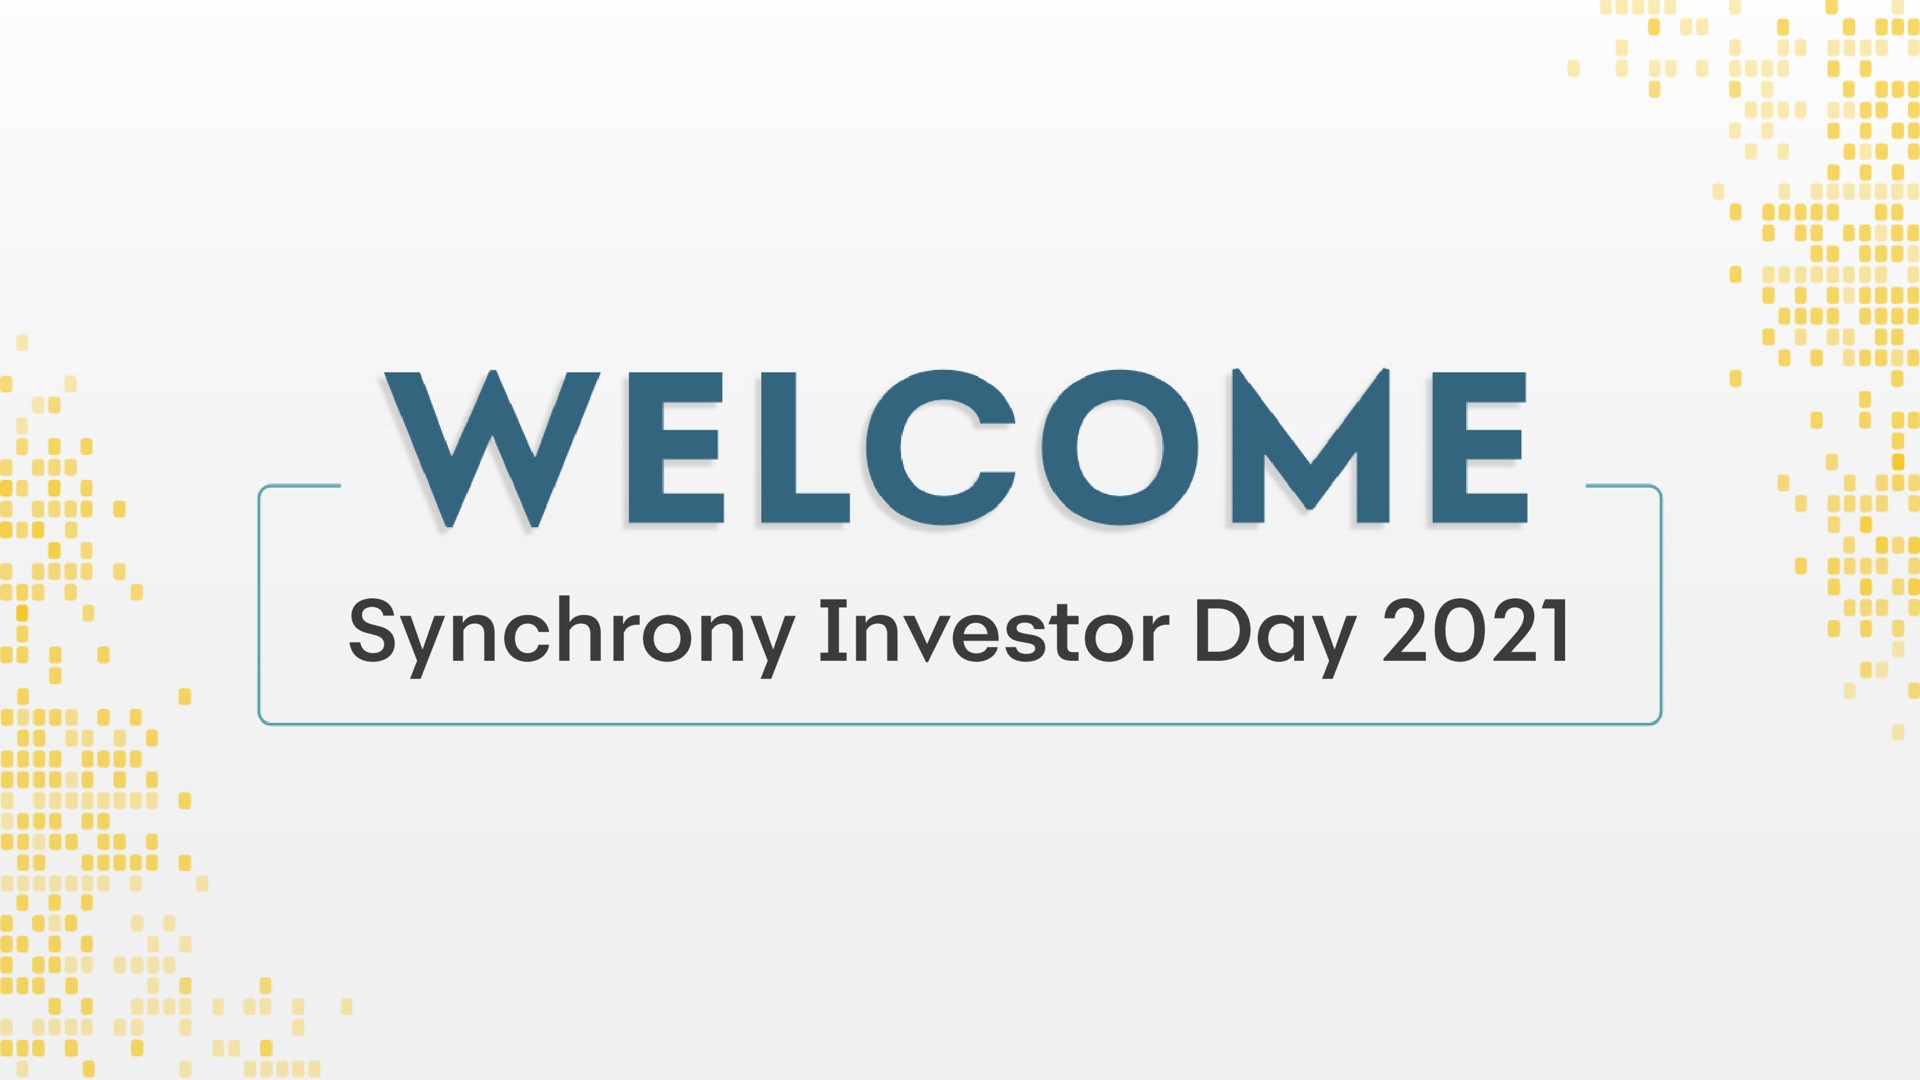 welcome synchrony investor day | Synchrony Financial